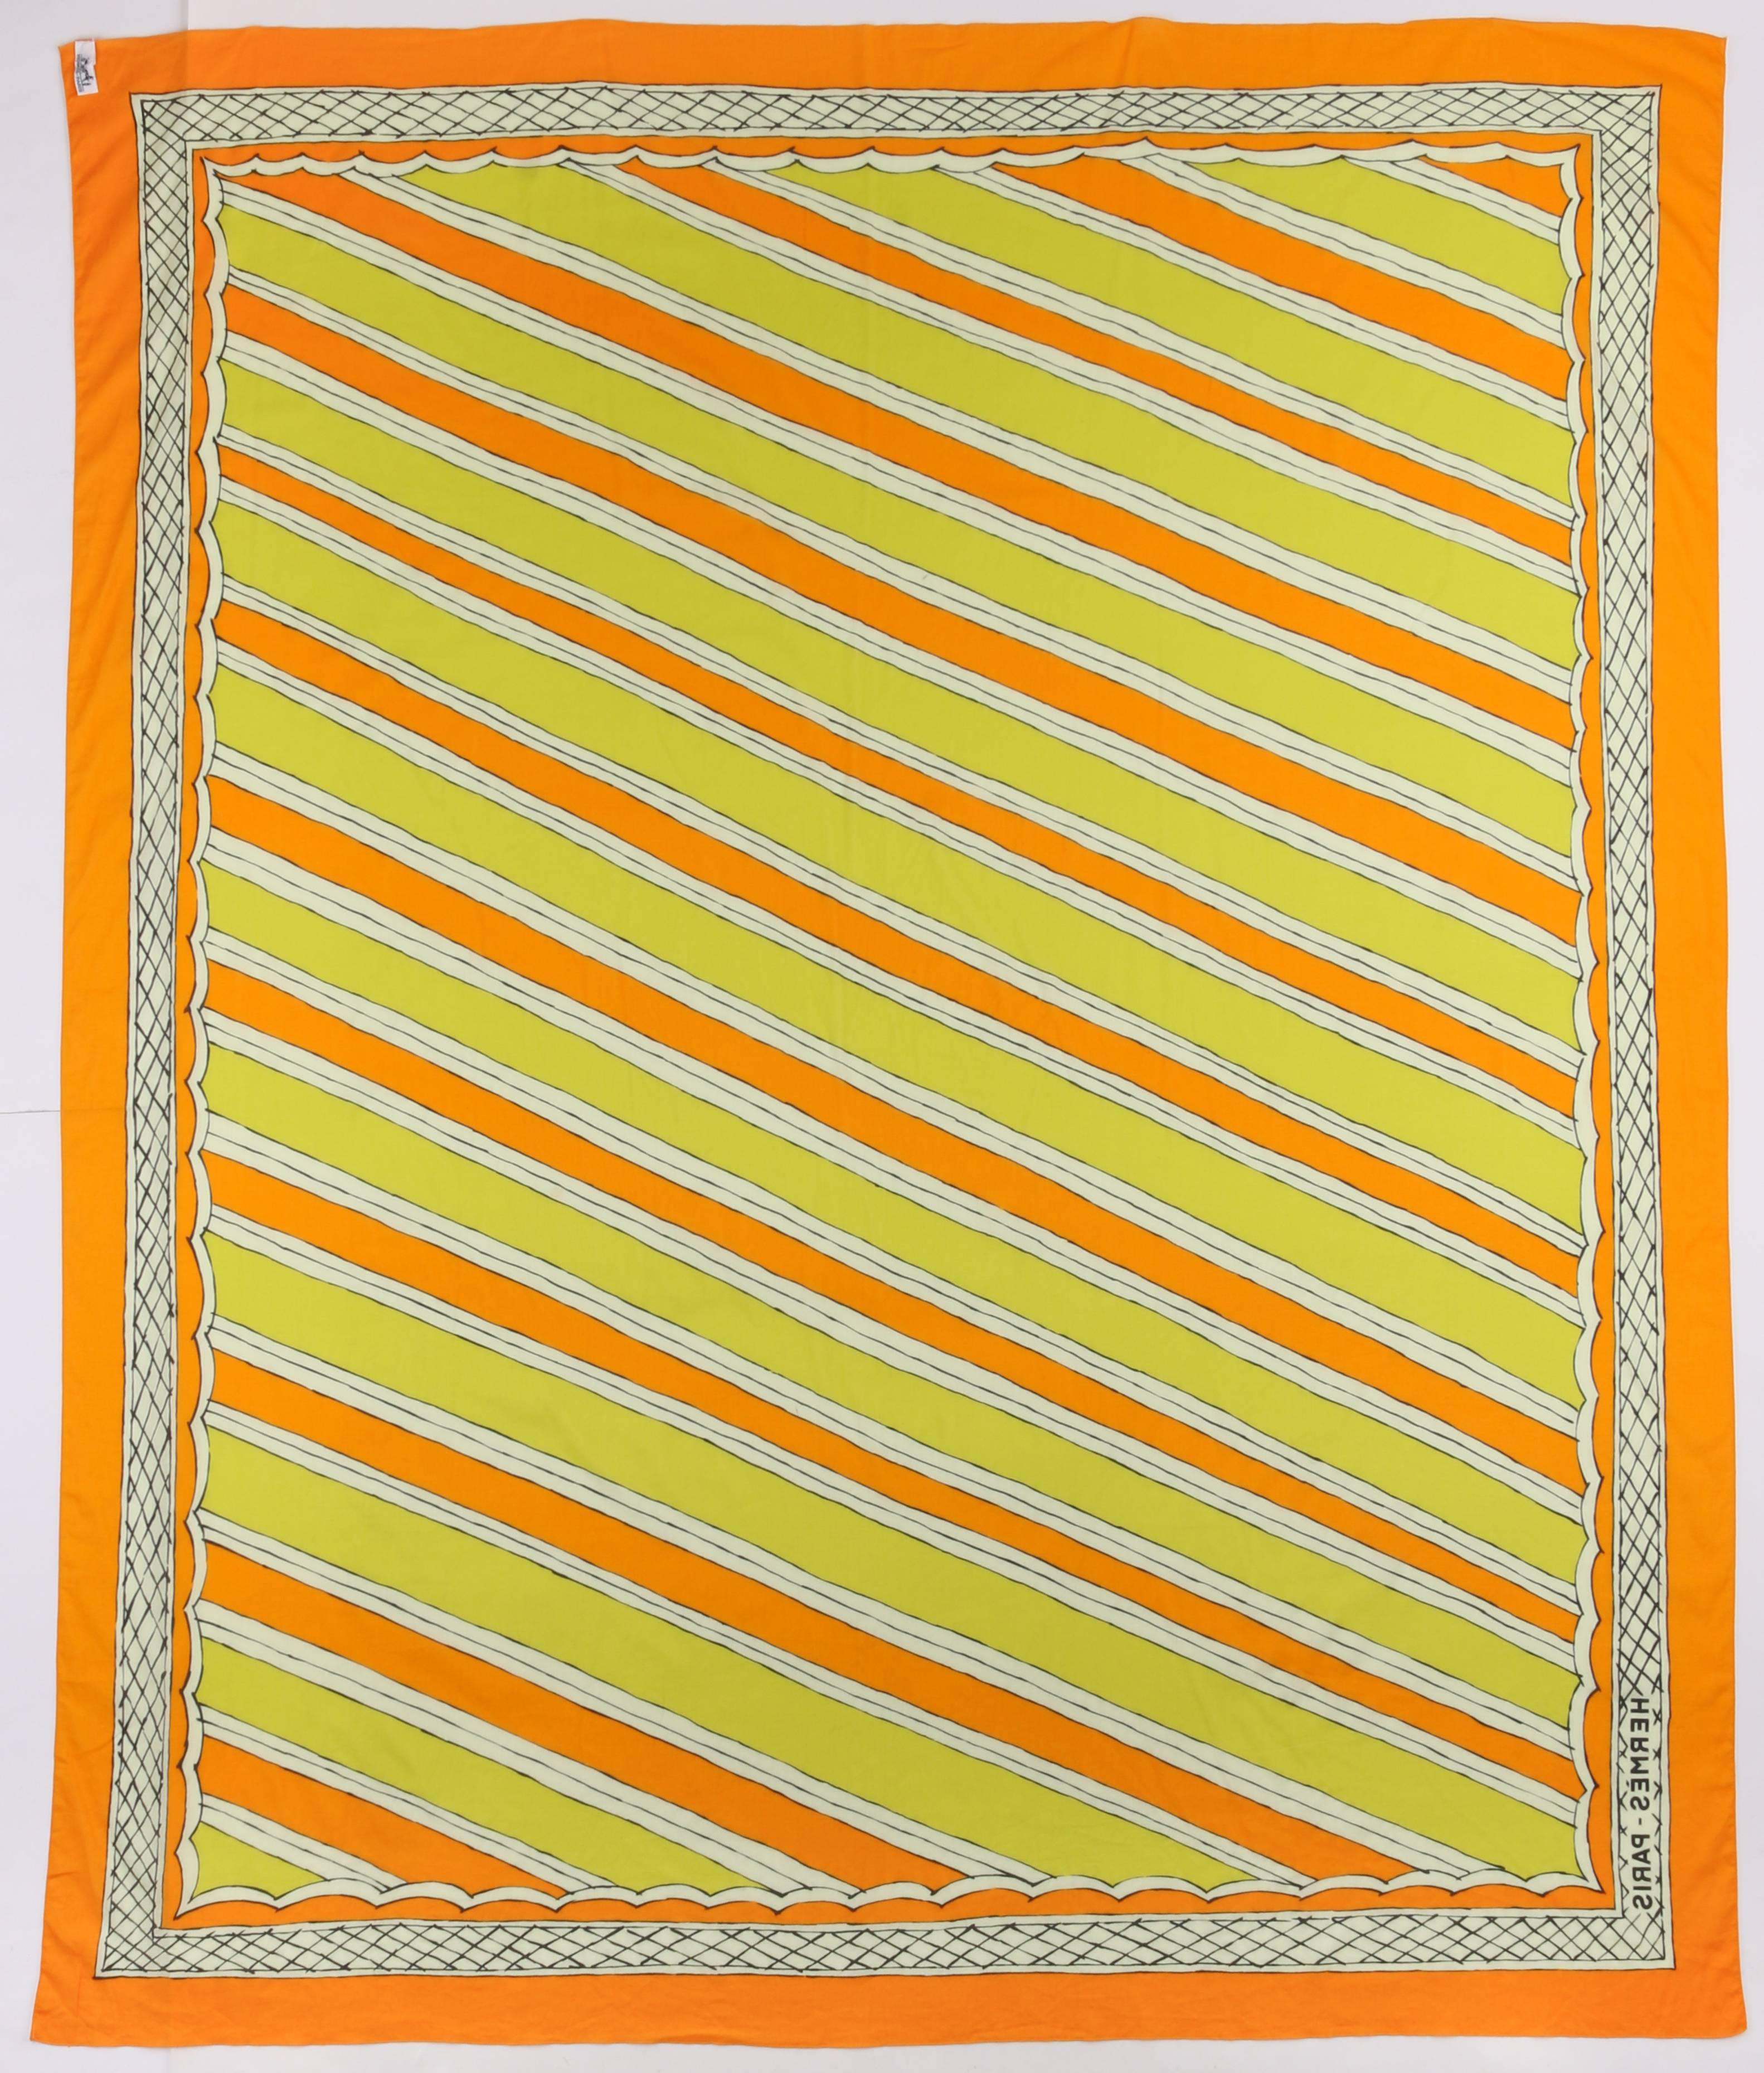 HERMES Giant Orange & Yellow Diagonal Striped Cotton Sarong Scarf Wrap Throw In Excellent Condition For Sale In Thiensville, WI